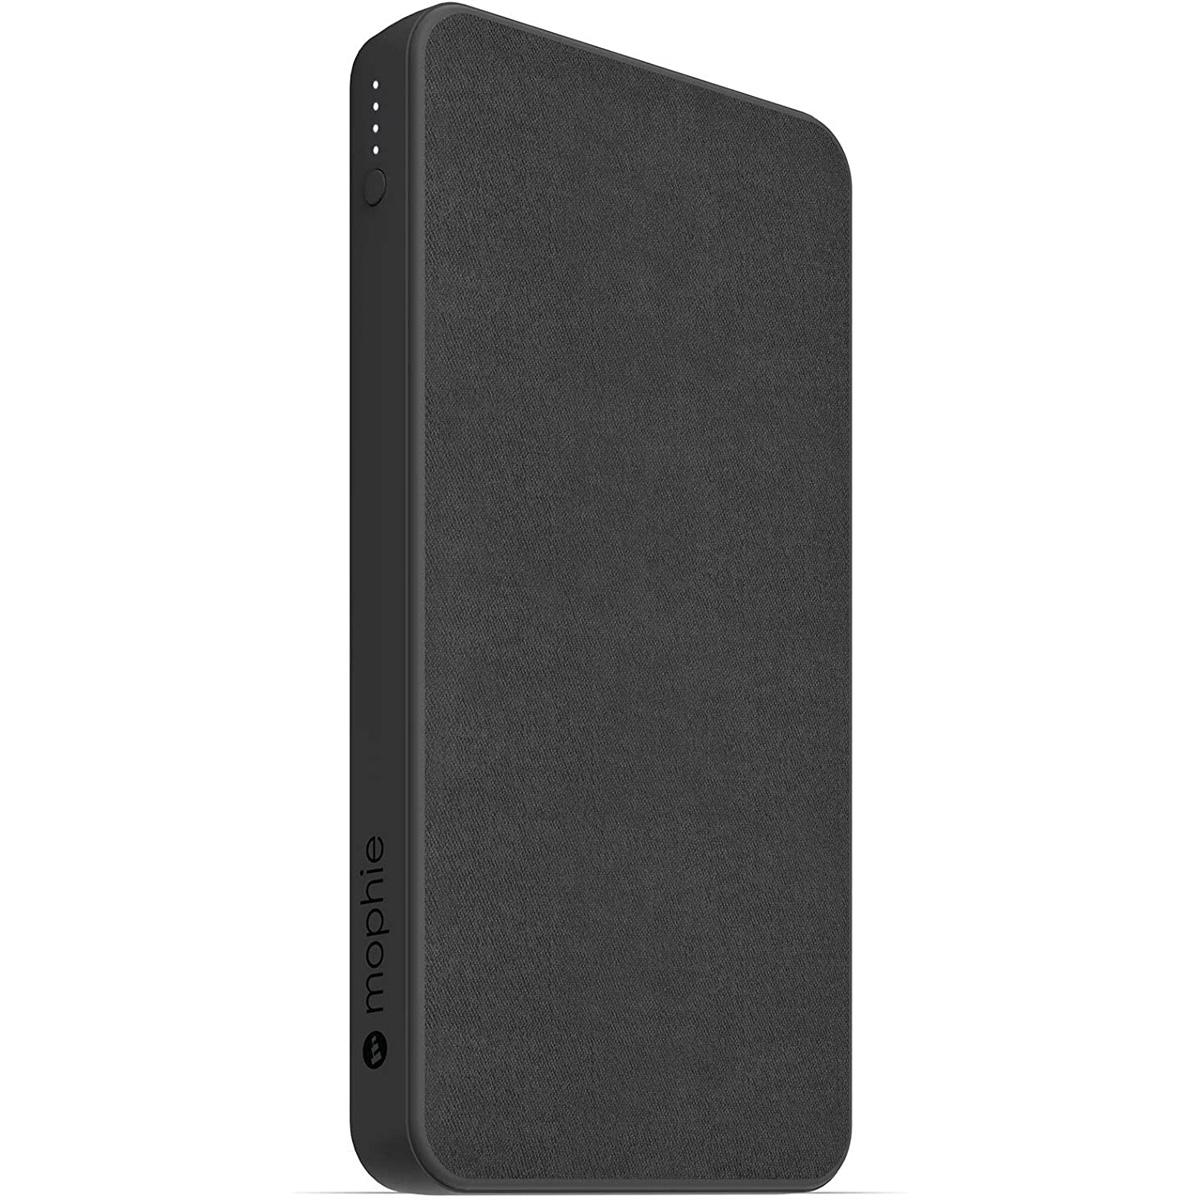 Mophie Powerstation 10000mAh Power Bank for $9.99 Shipped